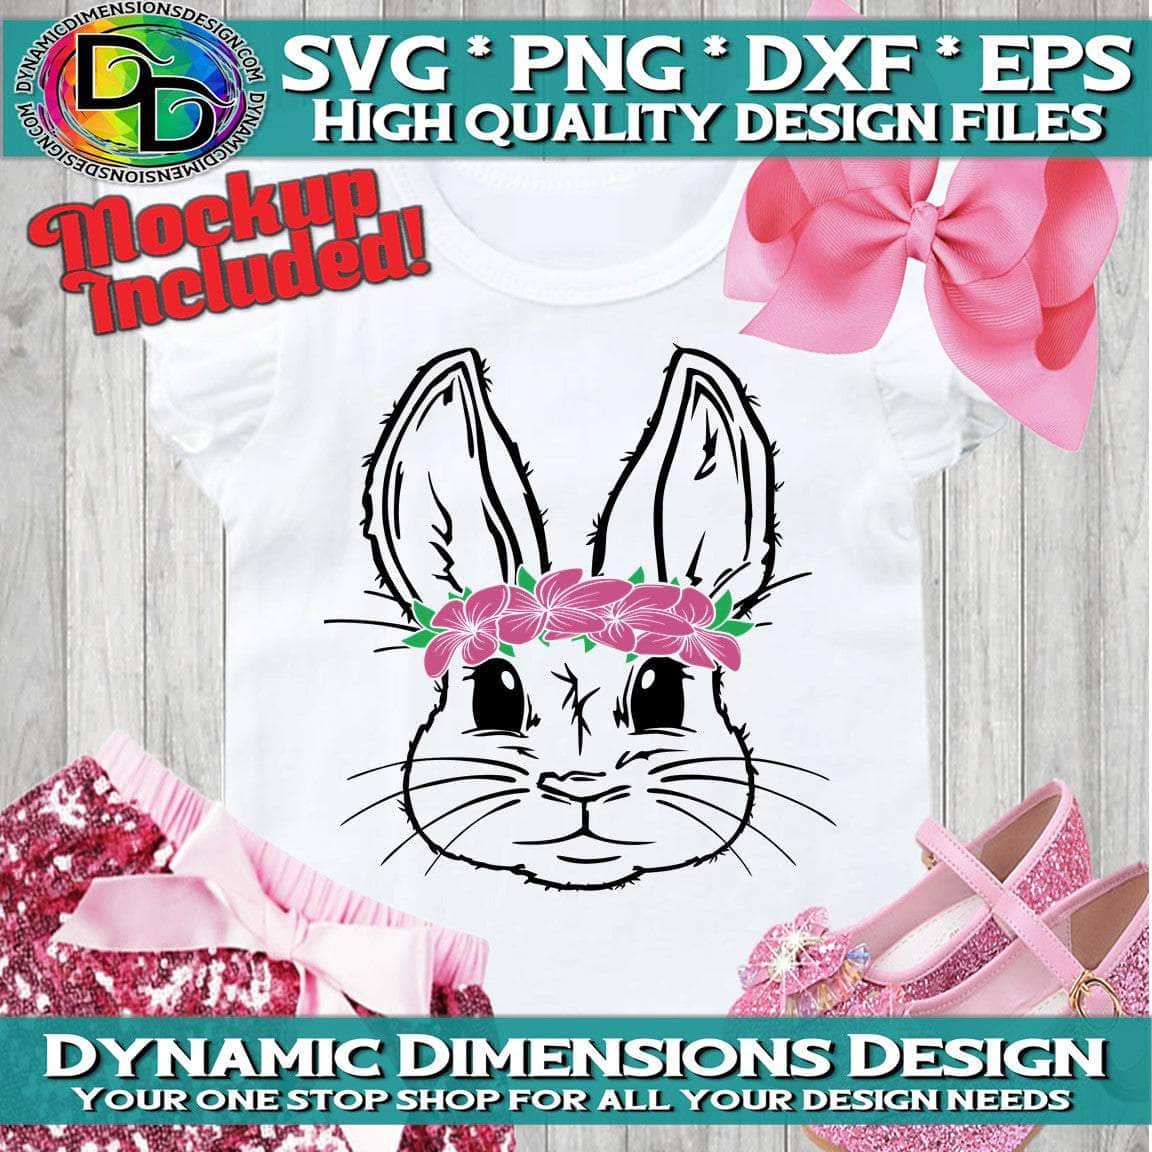 Bunny with Flower Headband svg, png, instant download, dxf, eps, pdf, jpg, cricut, silhouette, sublimtion, printable